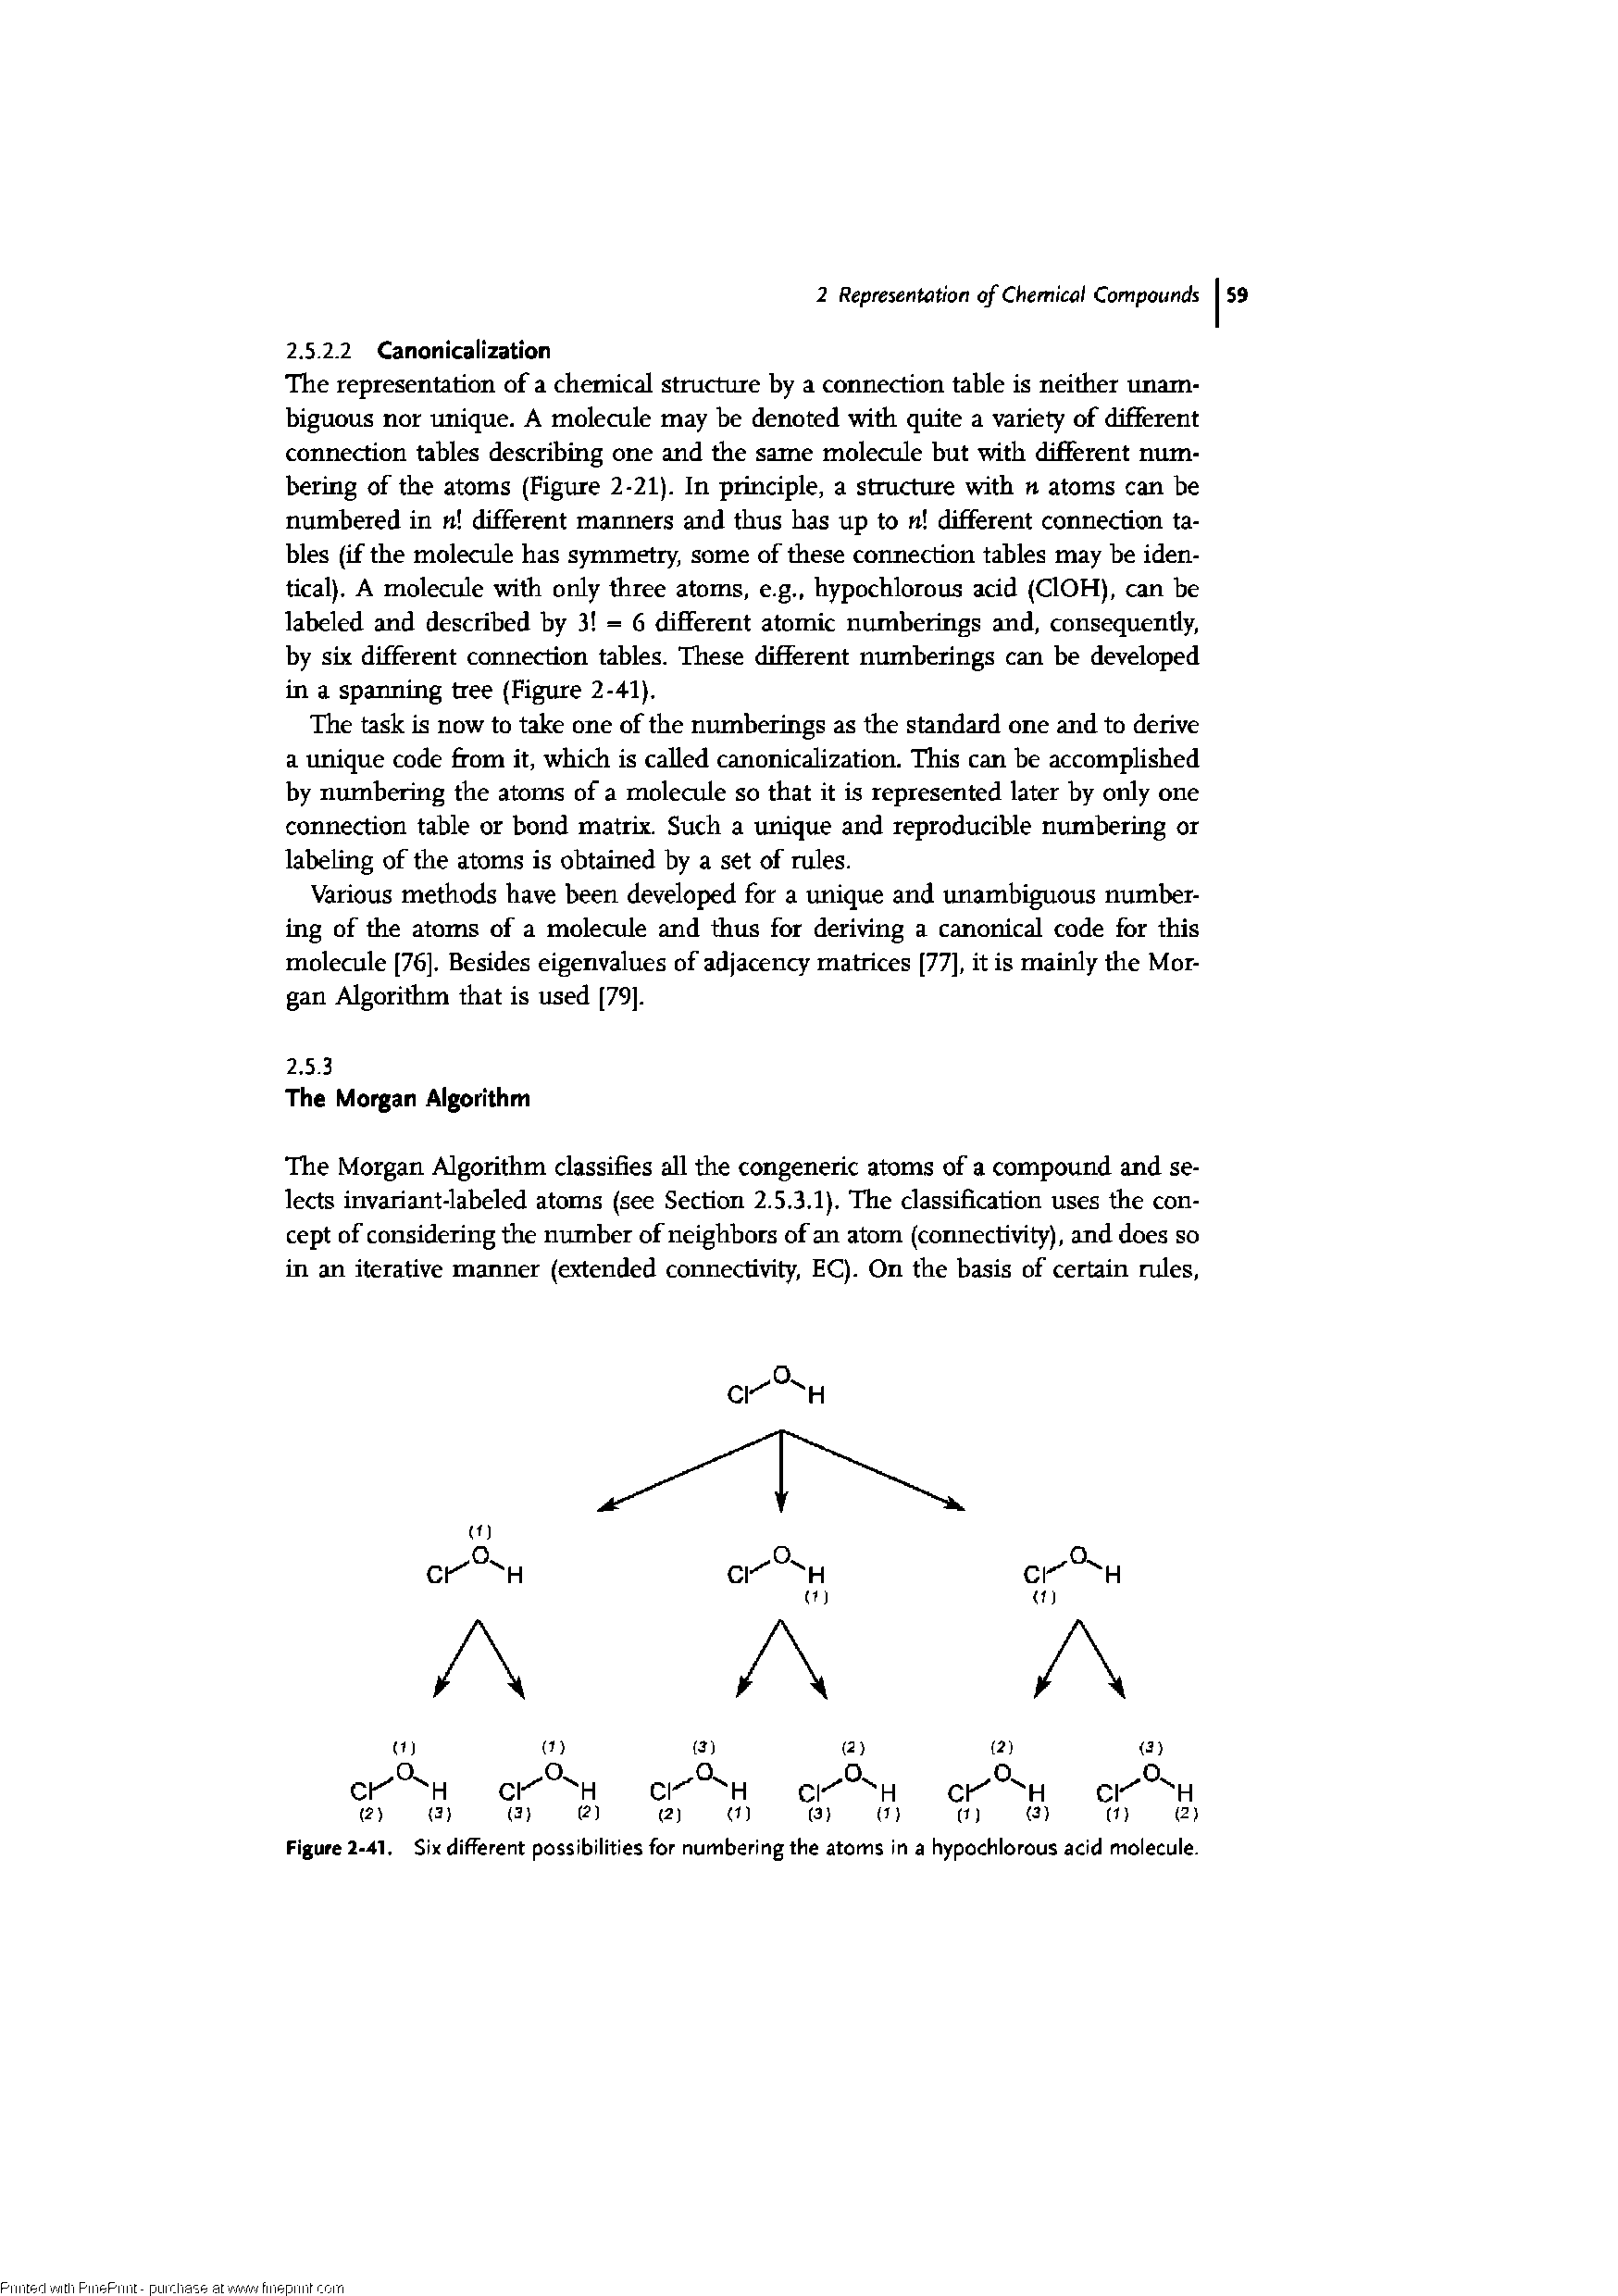 Figure 2-41. Six different possibilities for numbering the atoms in a hypochlorous acid molecule.